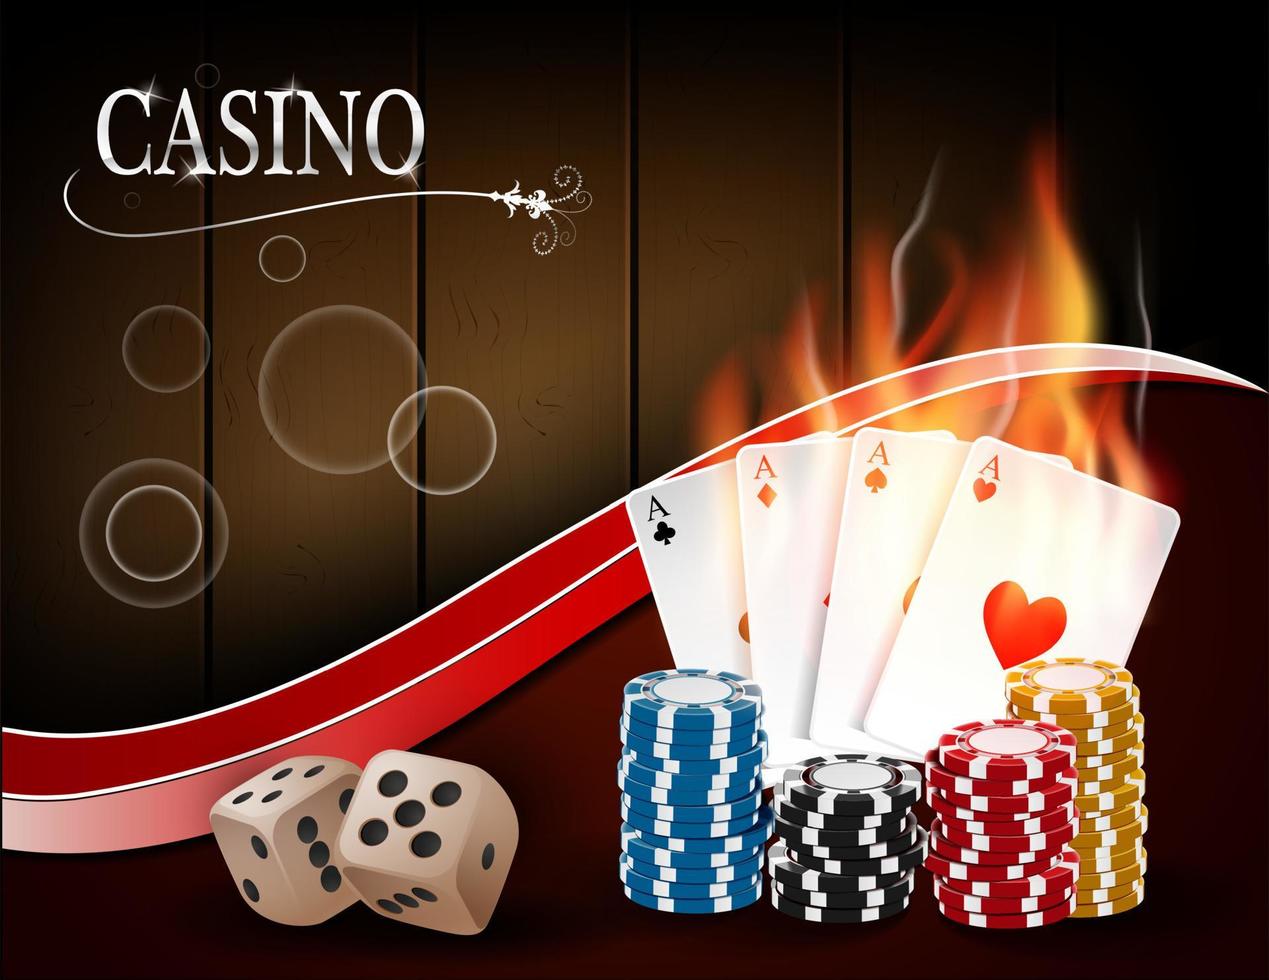 Poker casino gambling set with dice, cards, and chips on wood background vector